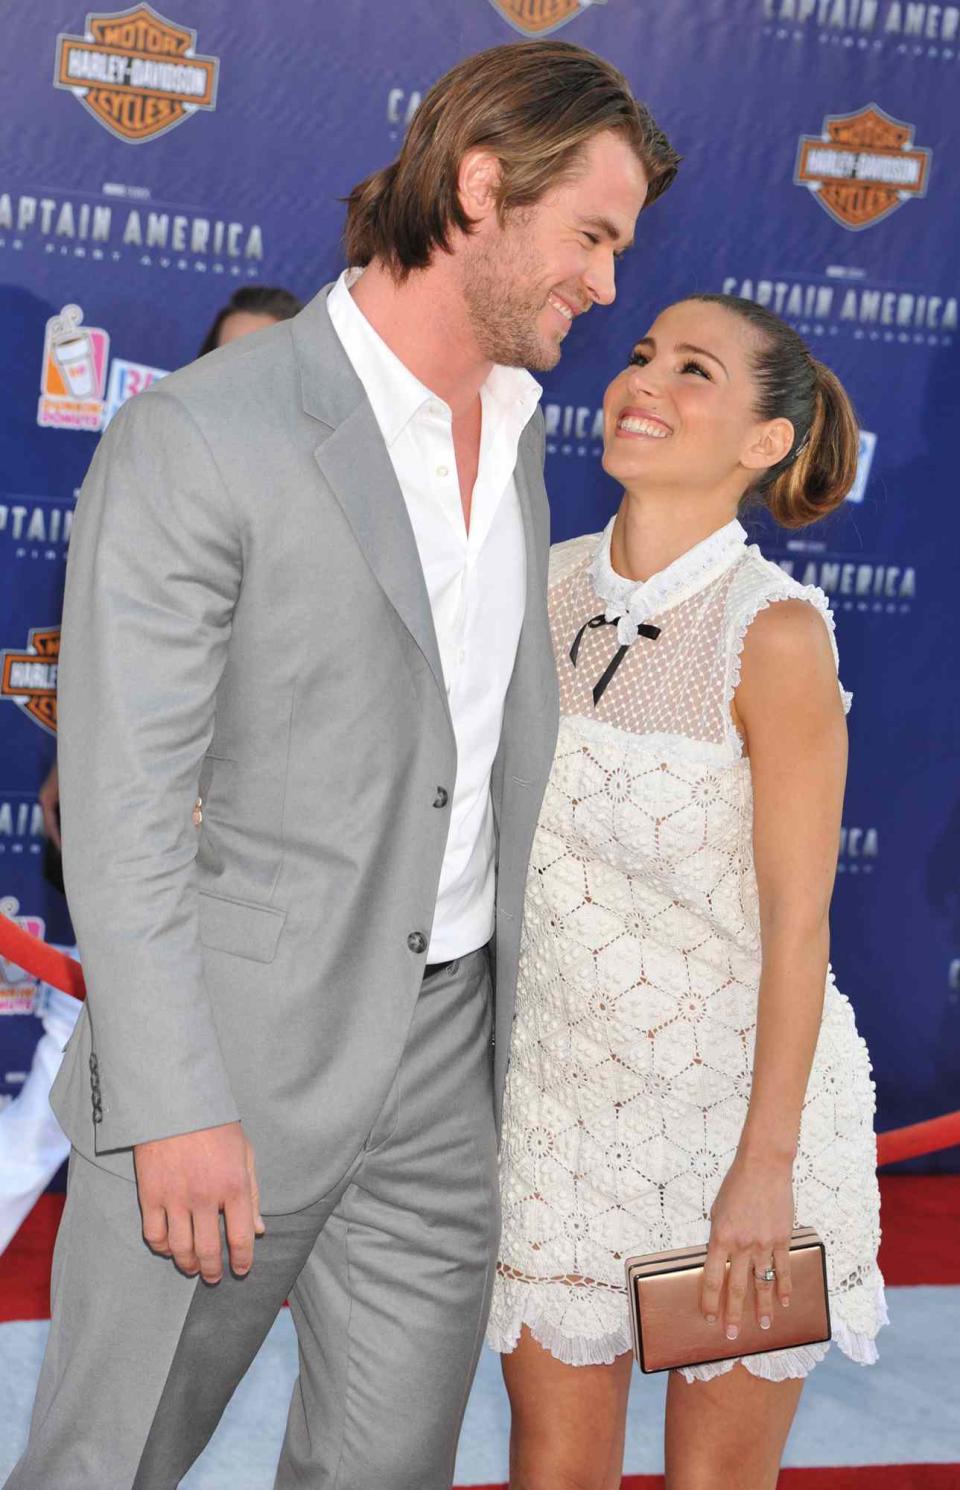 Actors Chris Hemsworth and Elsa Pataky arrive at the premiere of Paramount Pictures & Marvel Entertainment's "Captain America: The First Avenger" held at the El Capitan Theatre